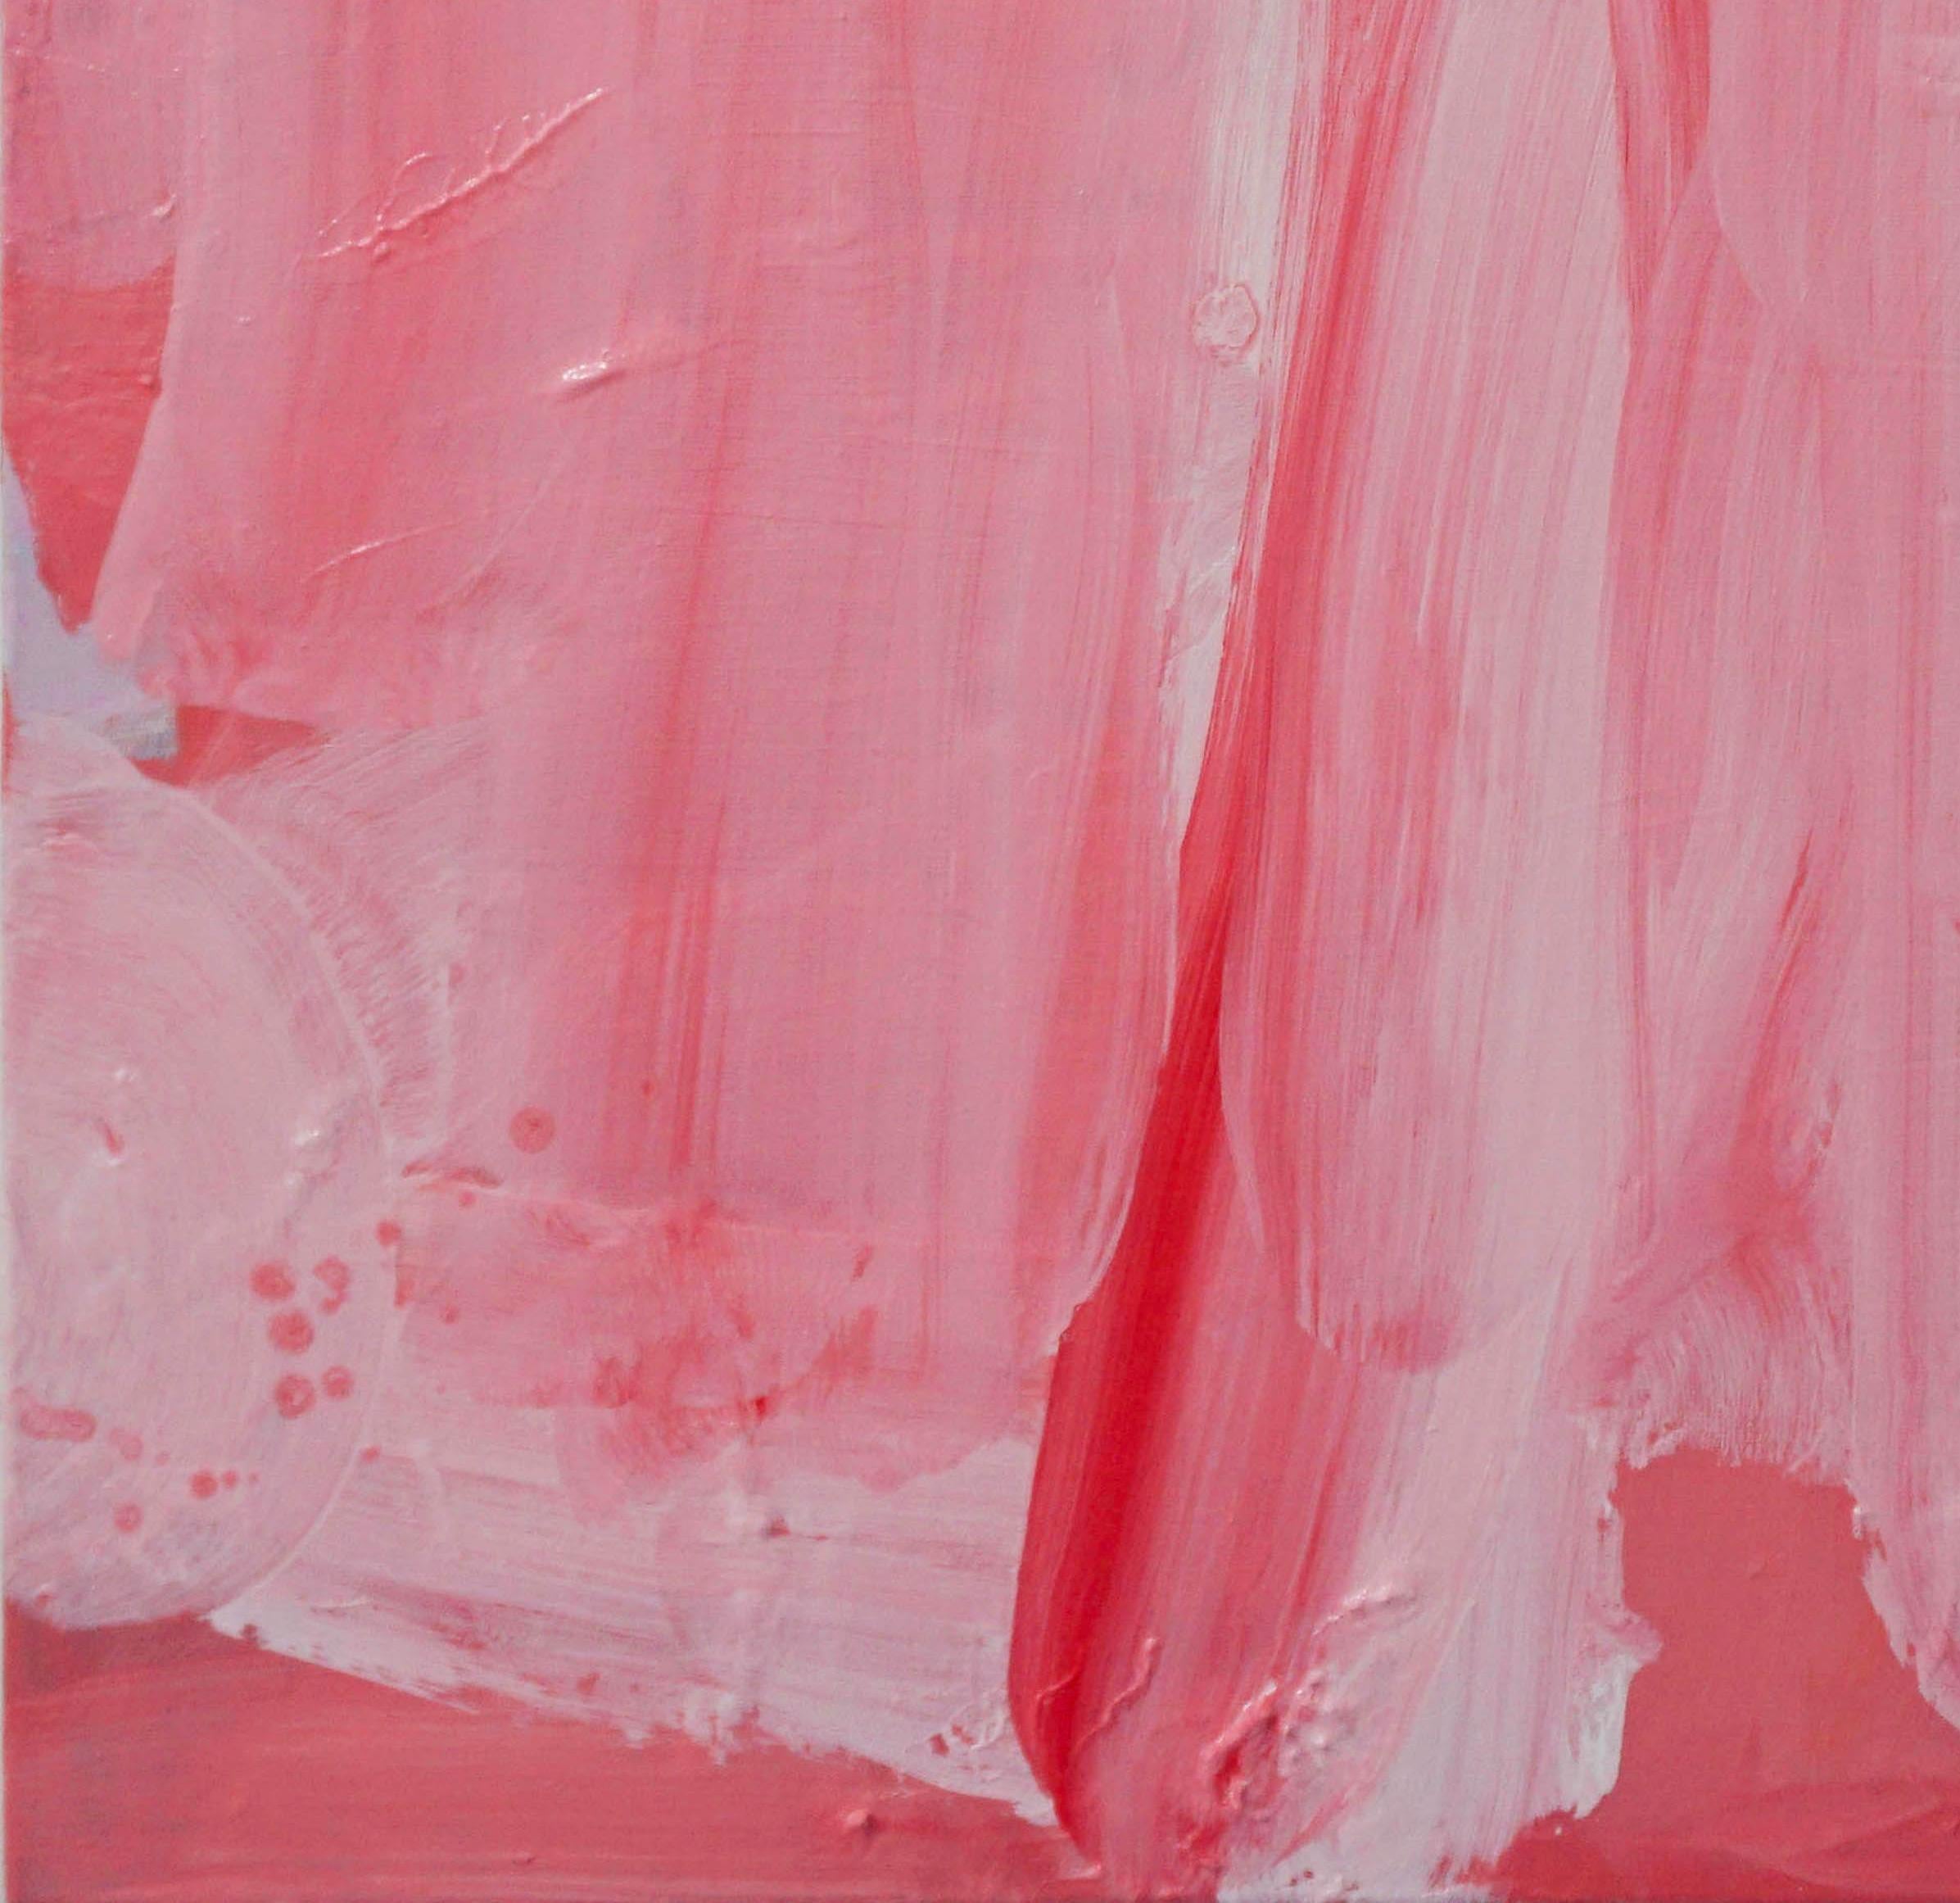 Coral Crush, pink abstract expressionist painting on canvas, textured - Painting by Lisa Fellerson